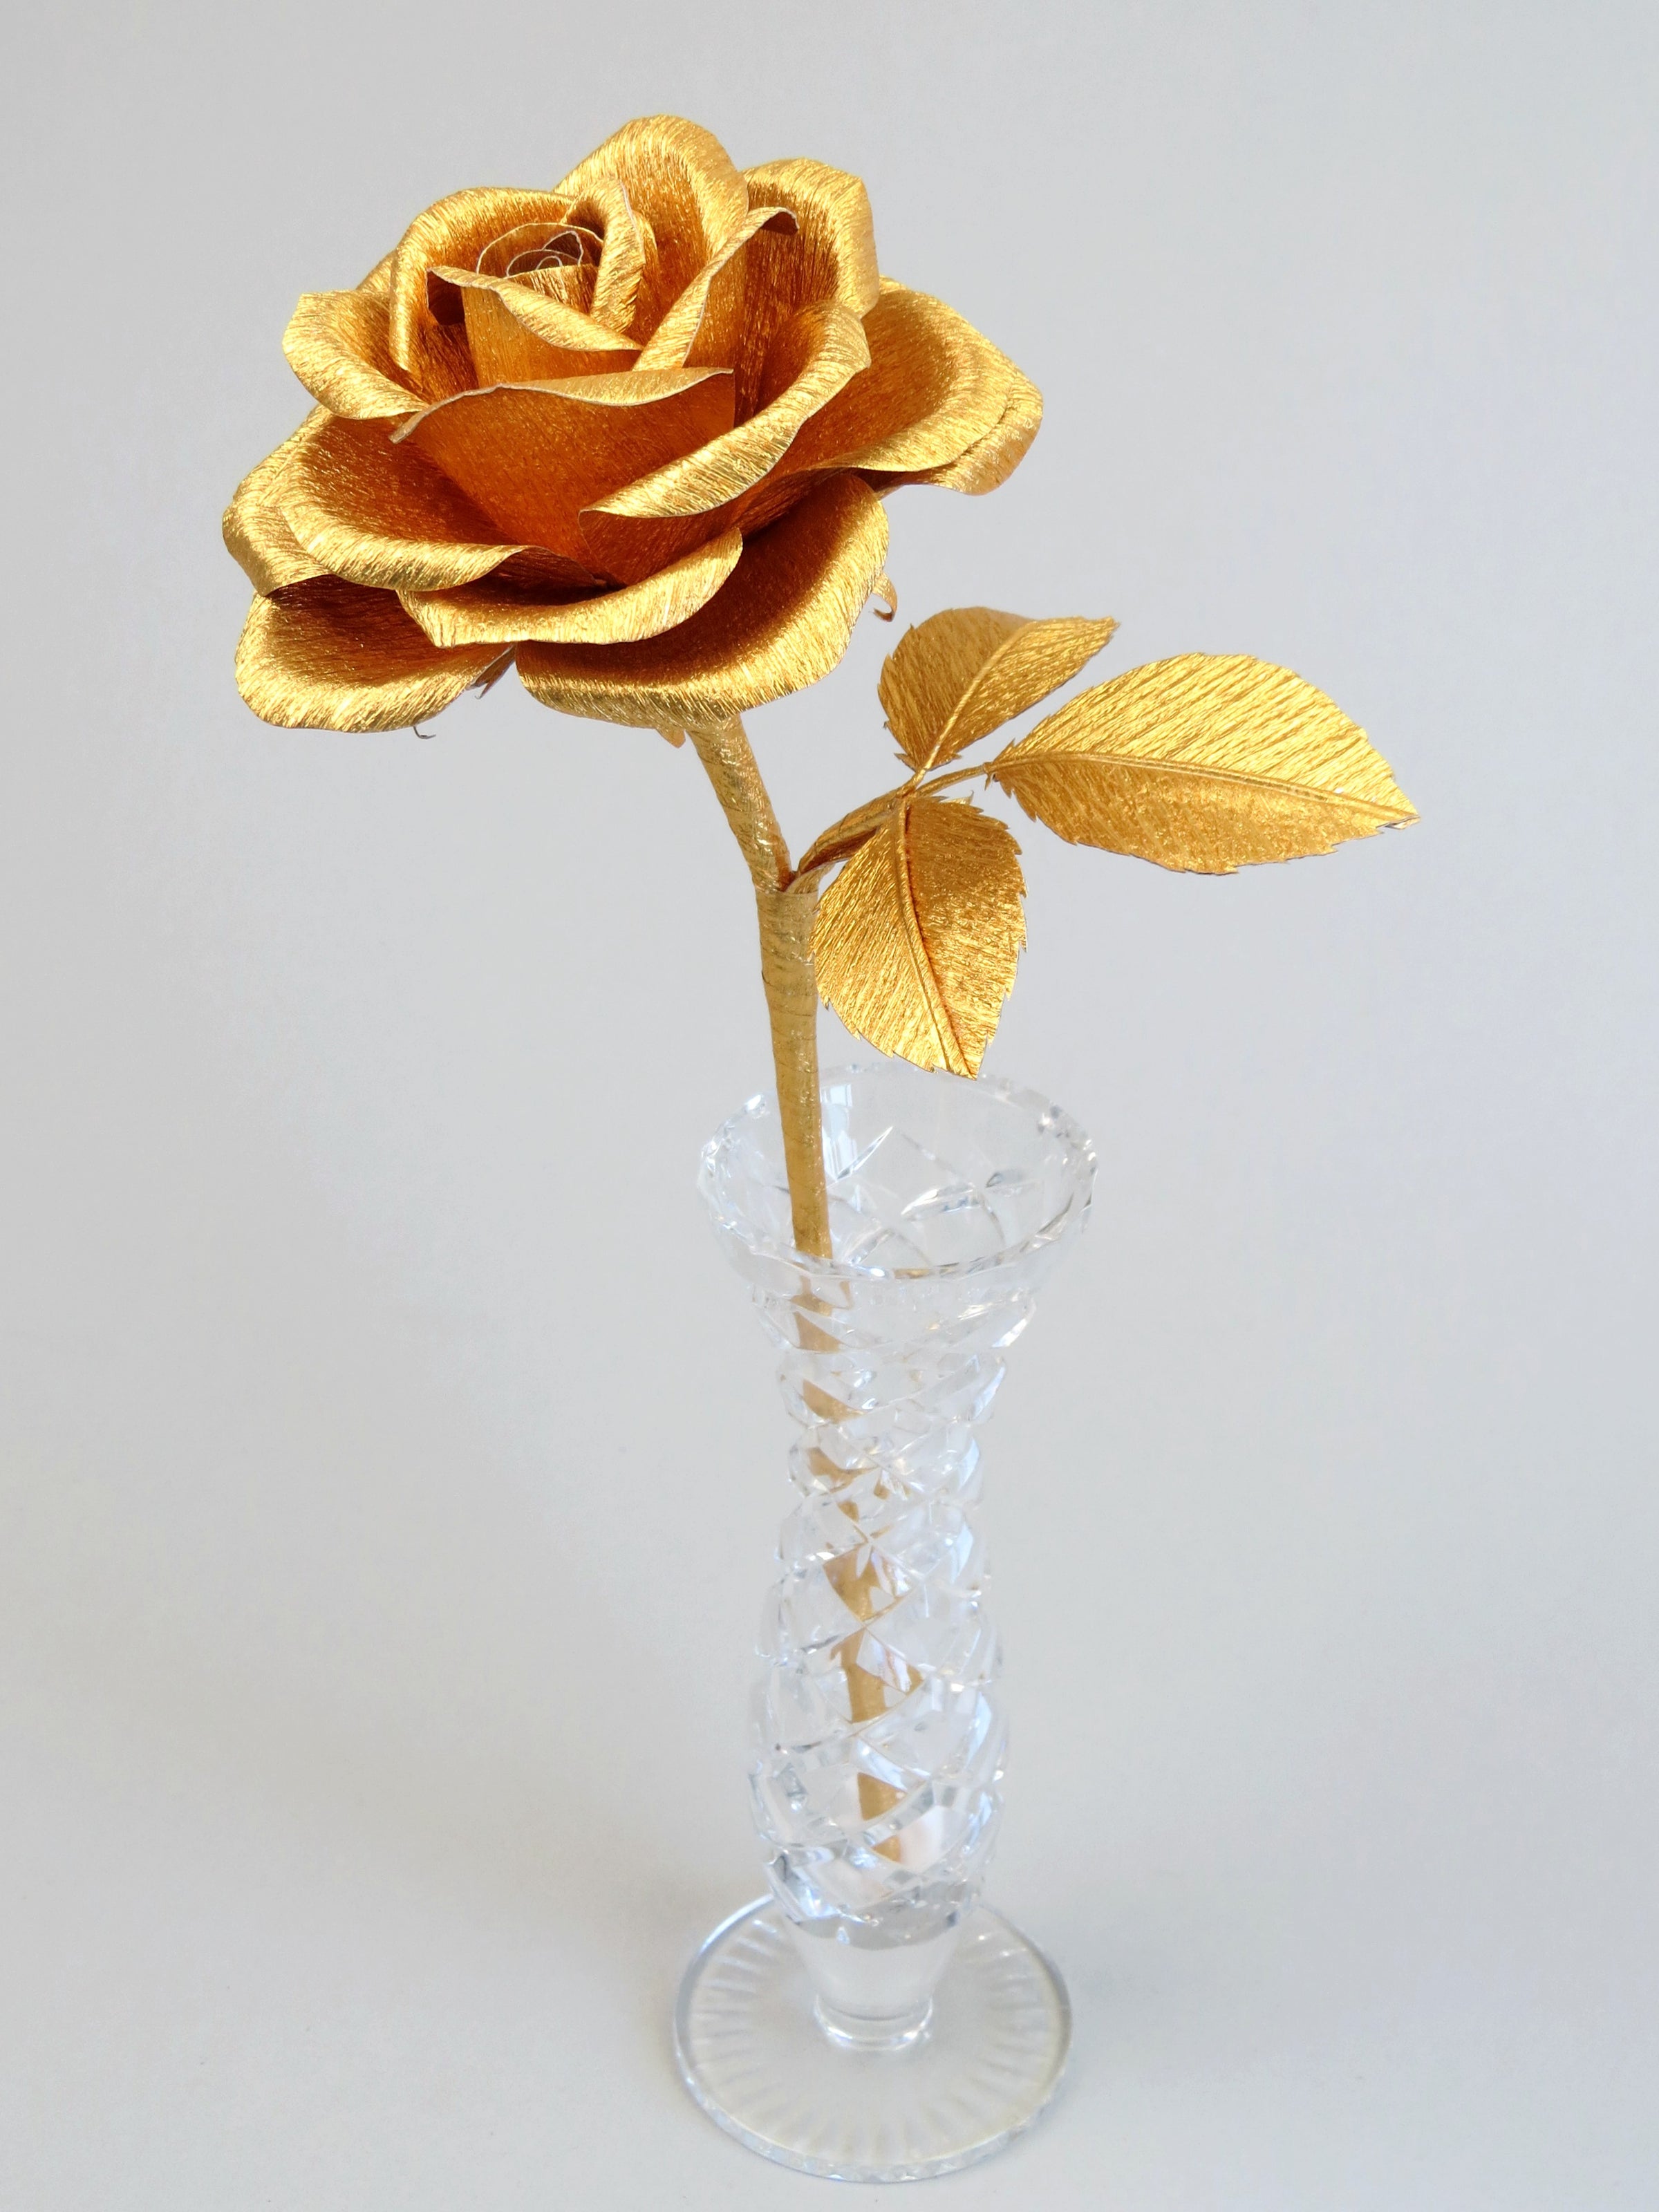 Gold crepe paper rose with three gold leaves standing in a narrow glass vase against a light grey backdrop